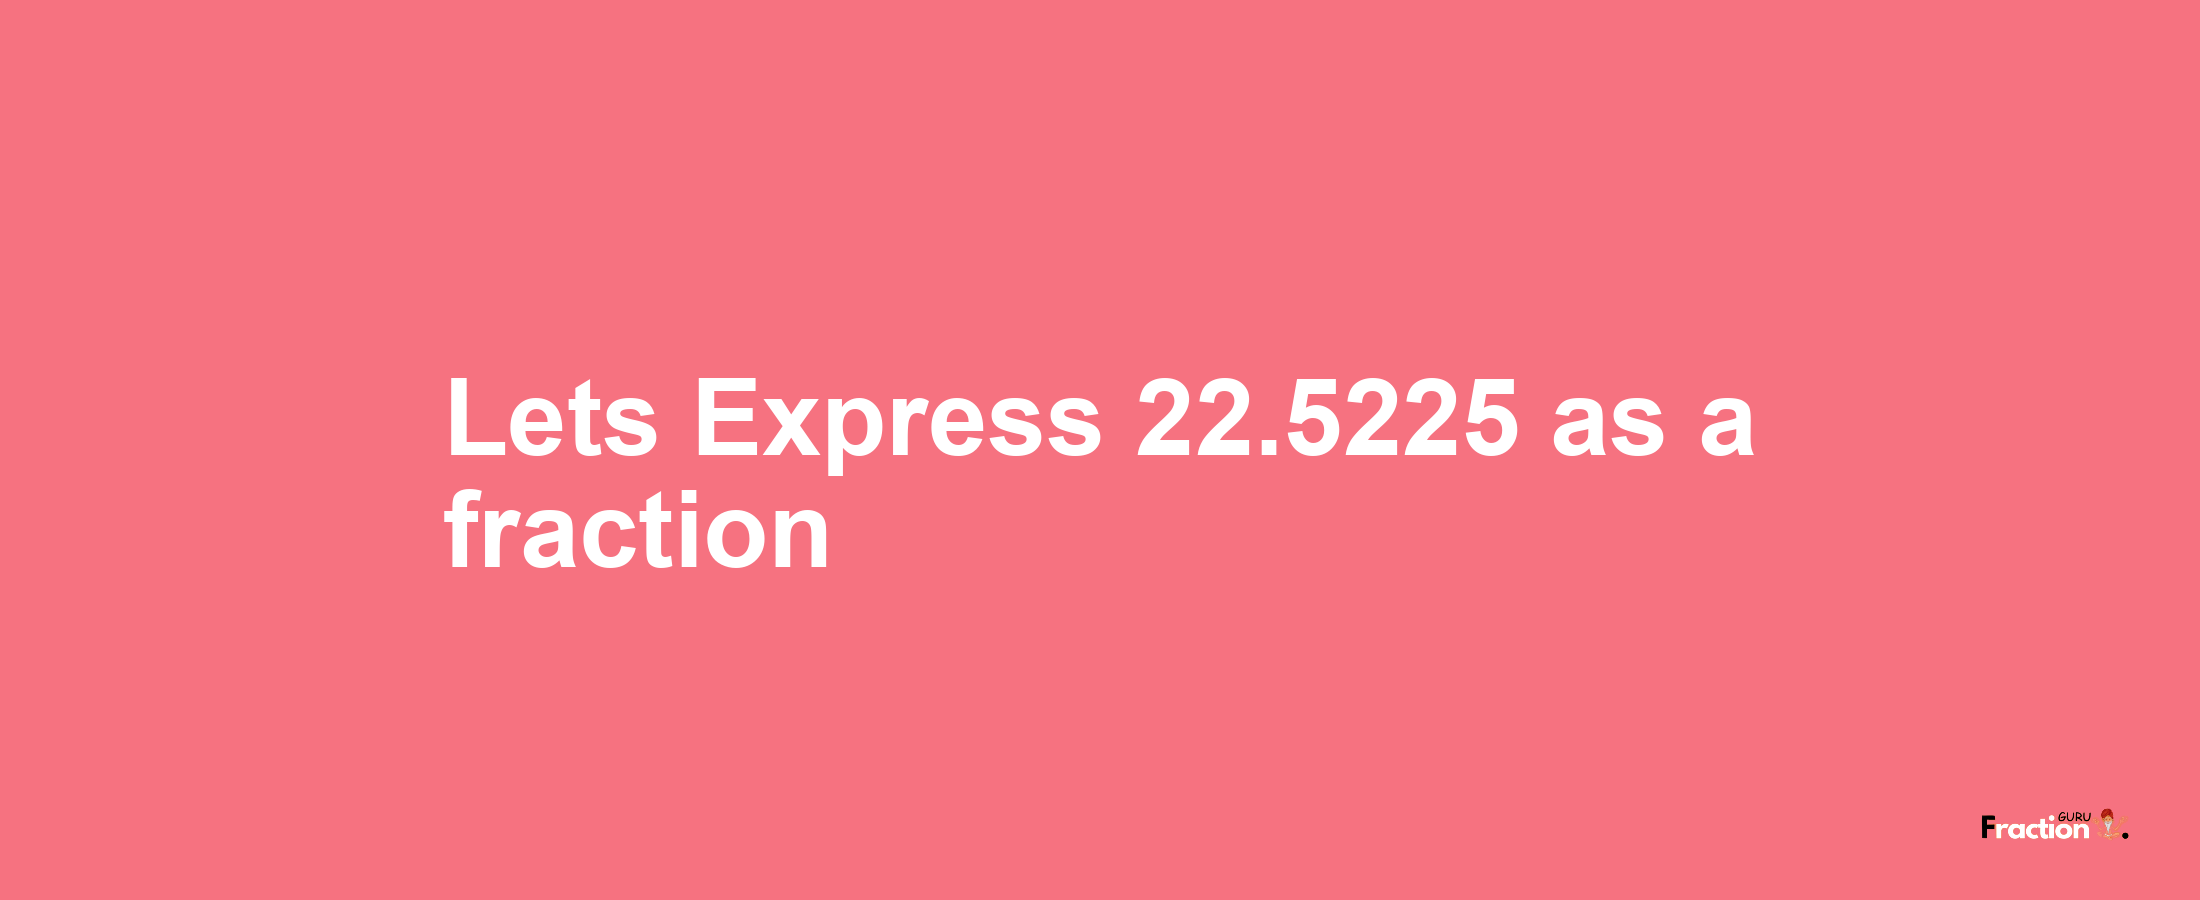 Lets Express 22.5225 as afraction